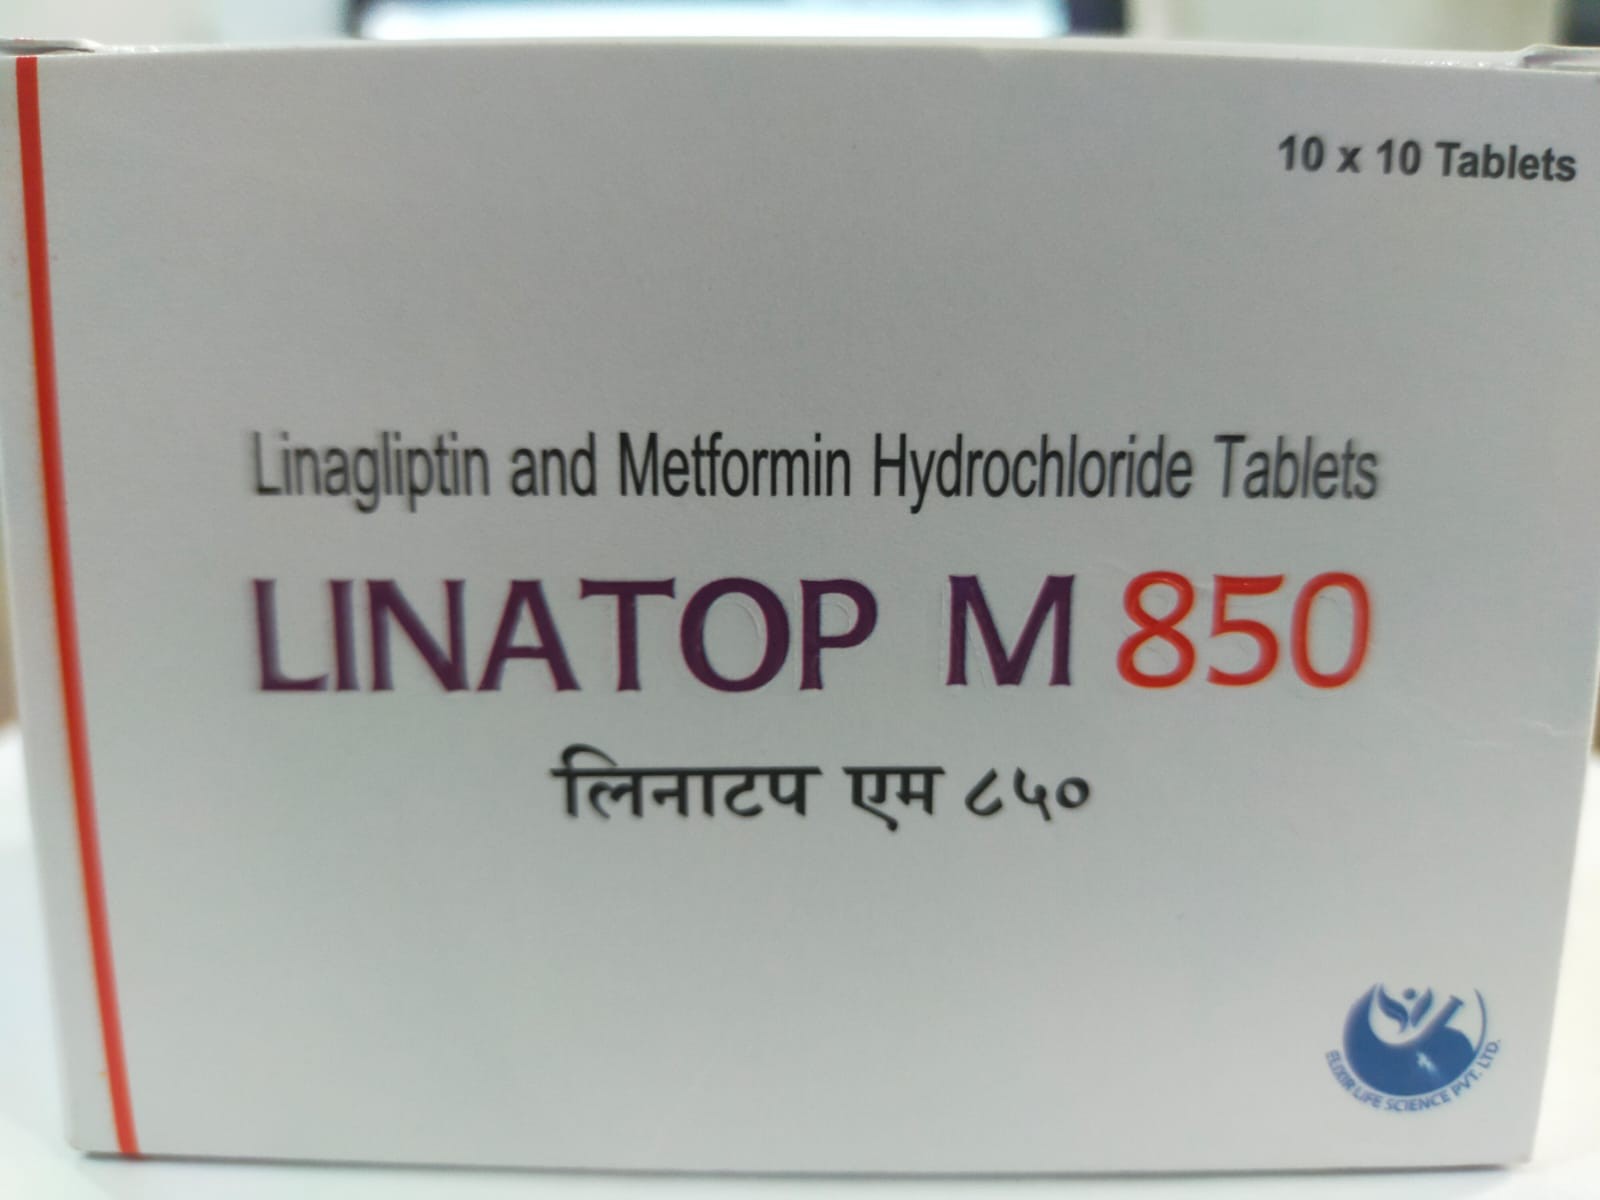 Linatop M 850 Tablets